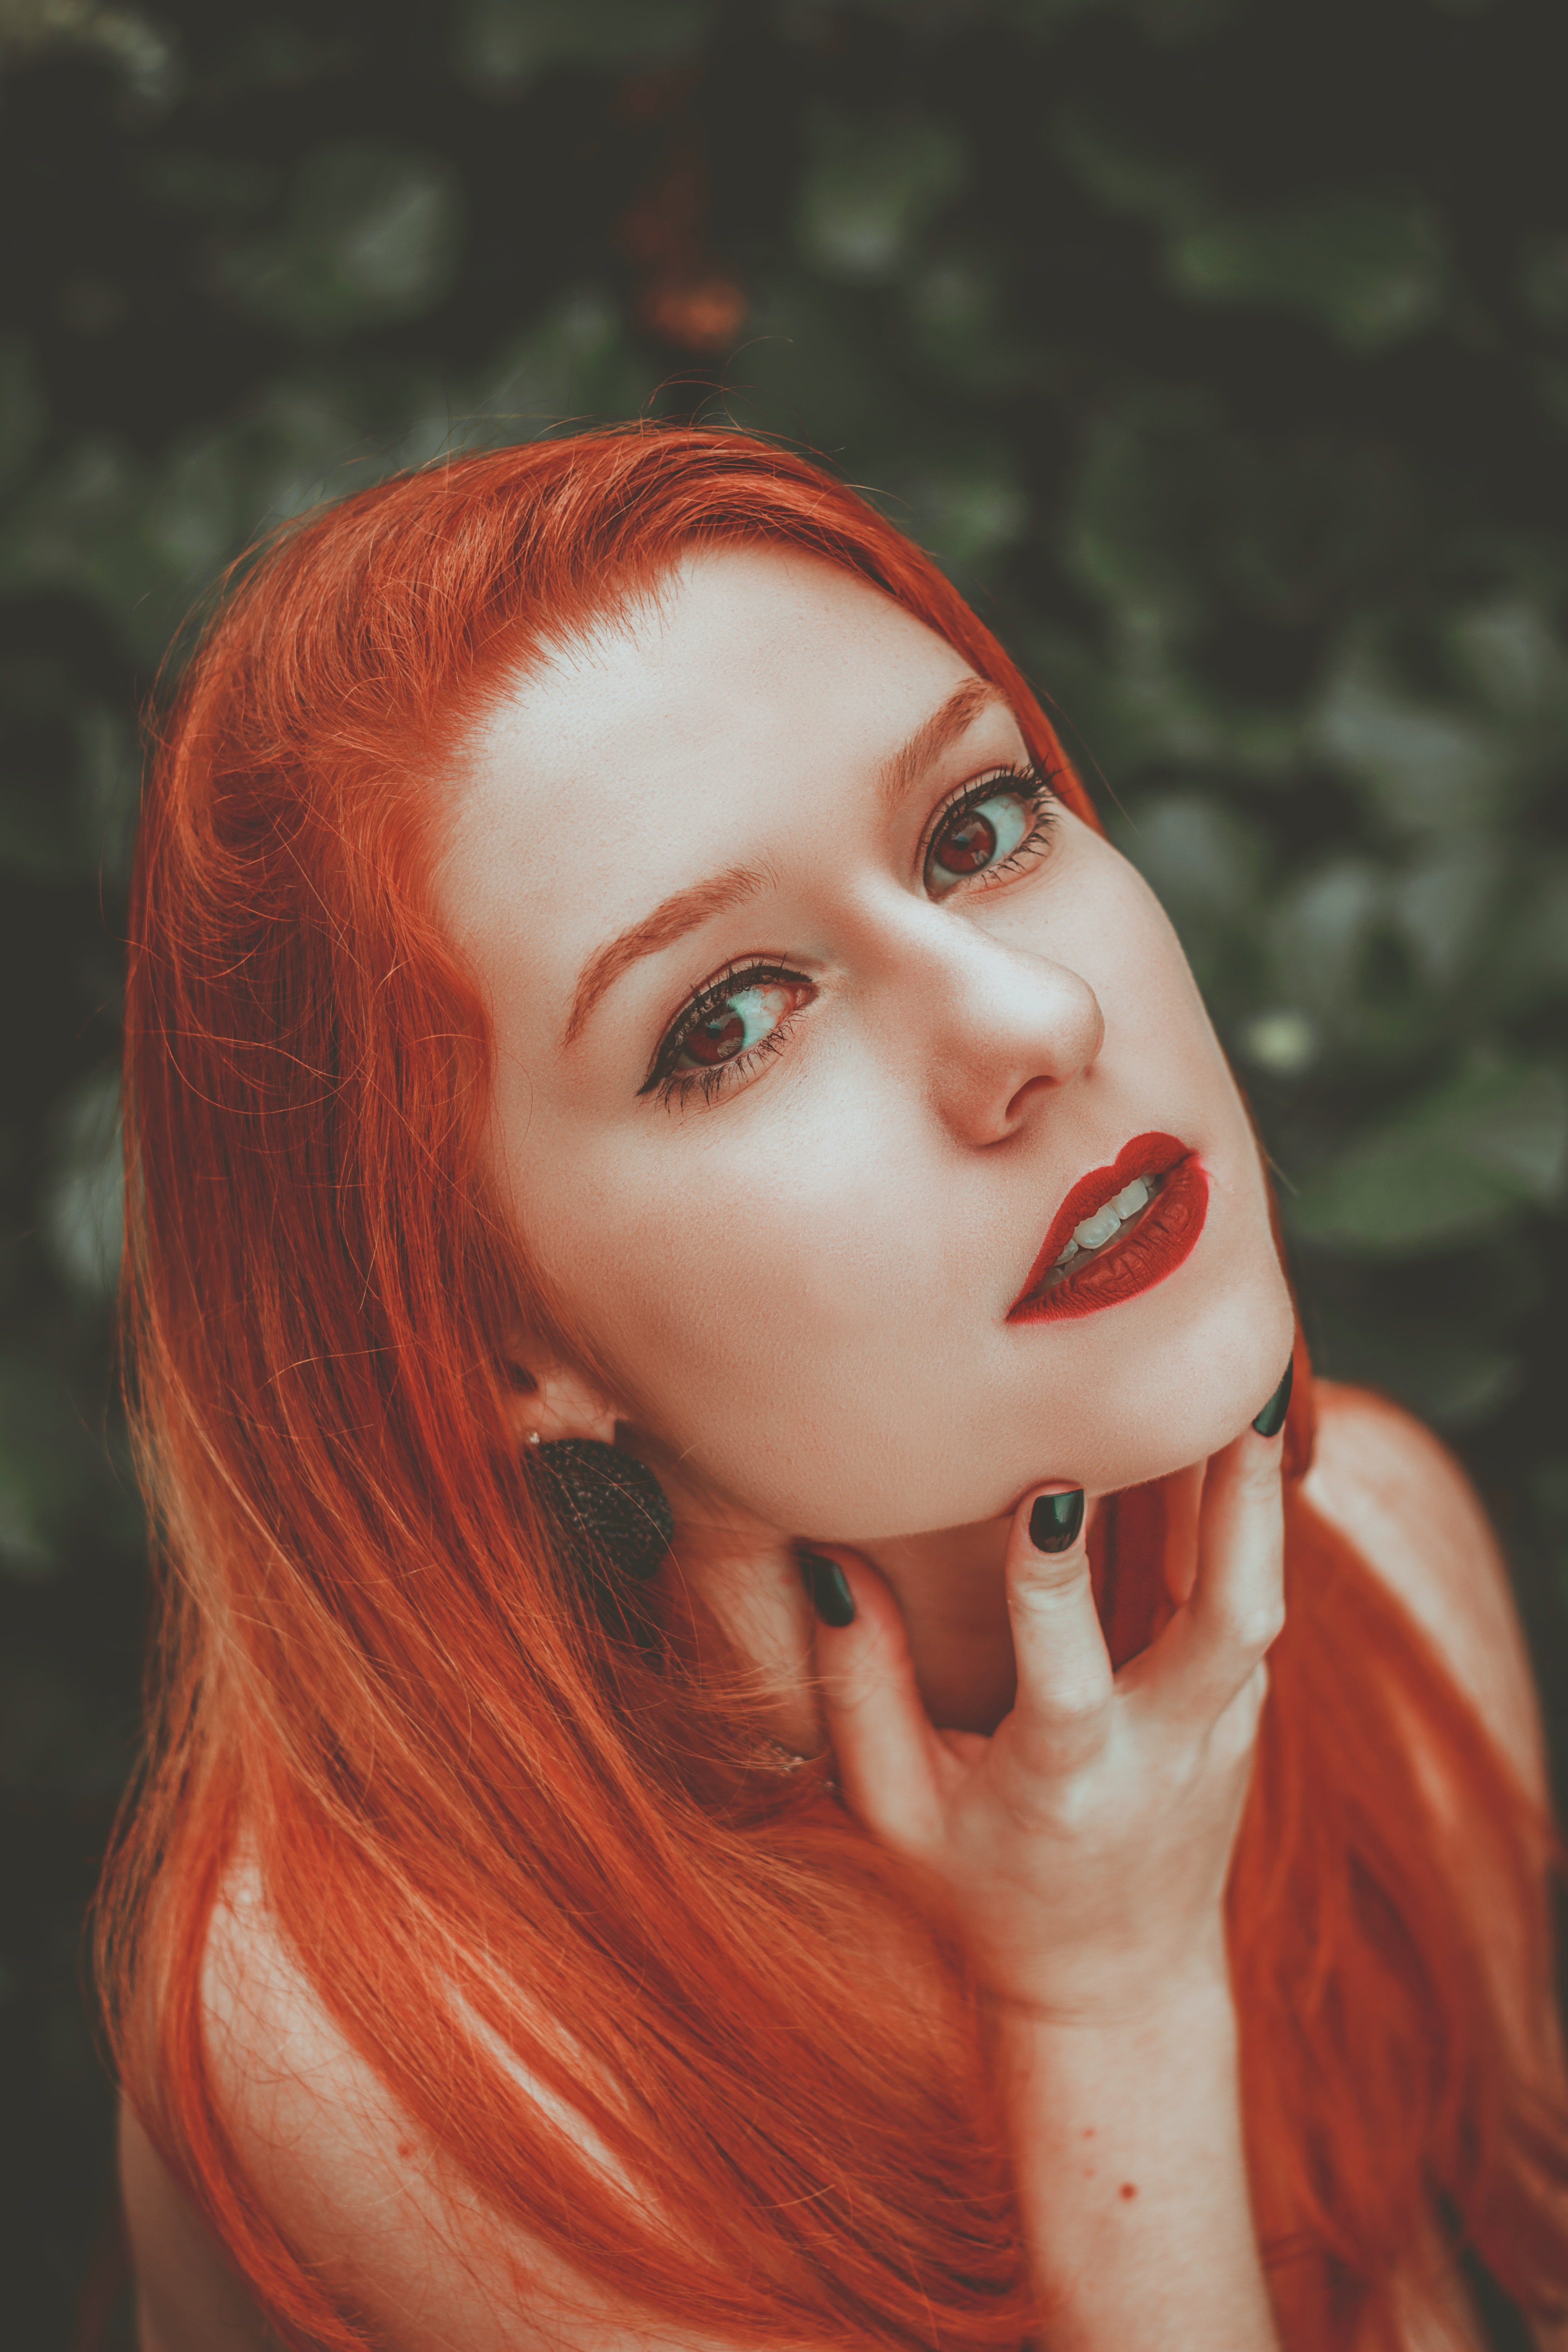 A woman with red hair. | Source: Pexels